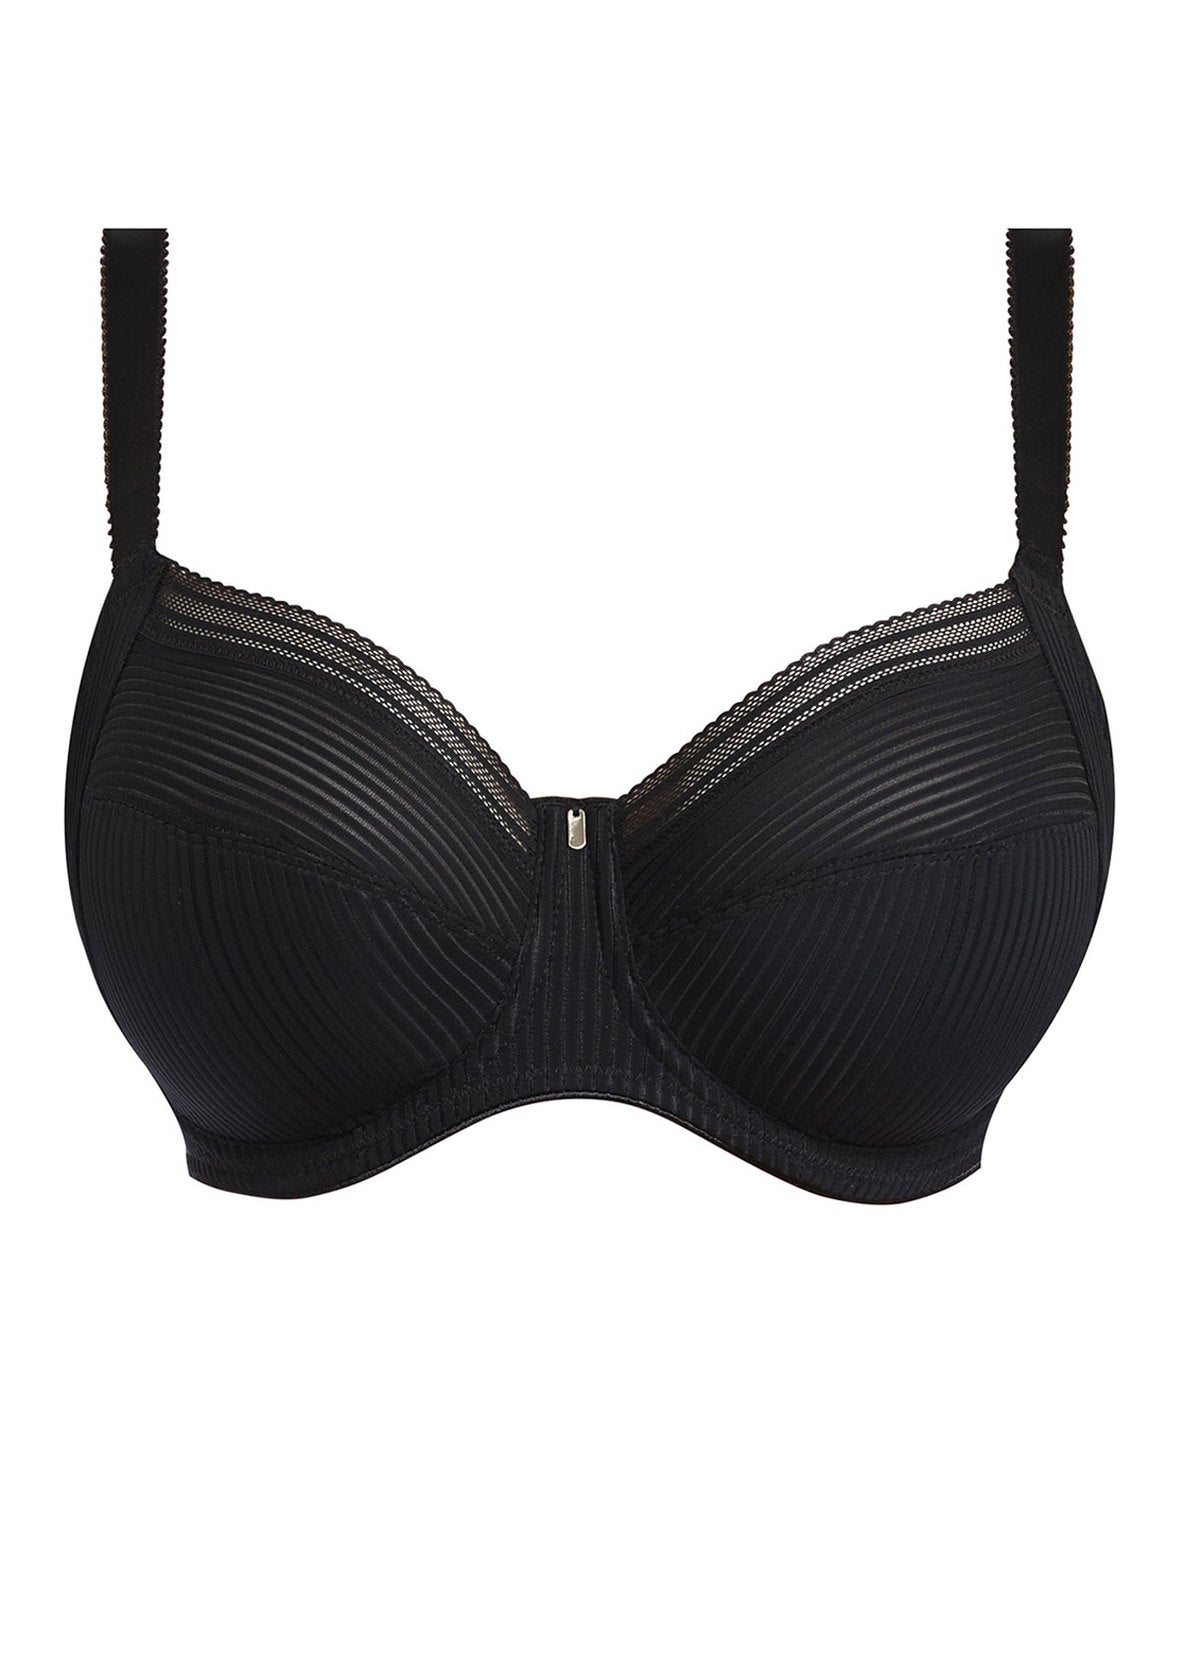 Fusion Full Cup Side Support Bra - Black – Leia Lingerie